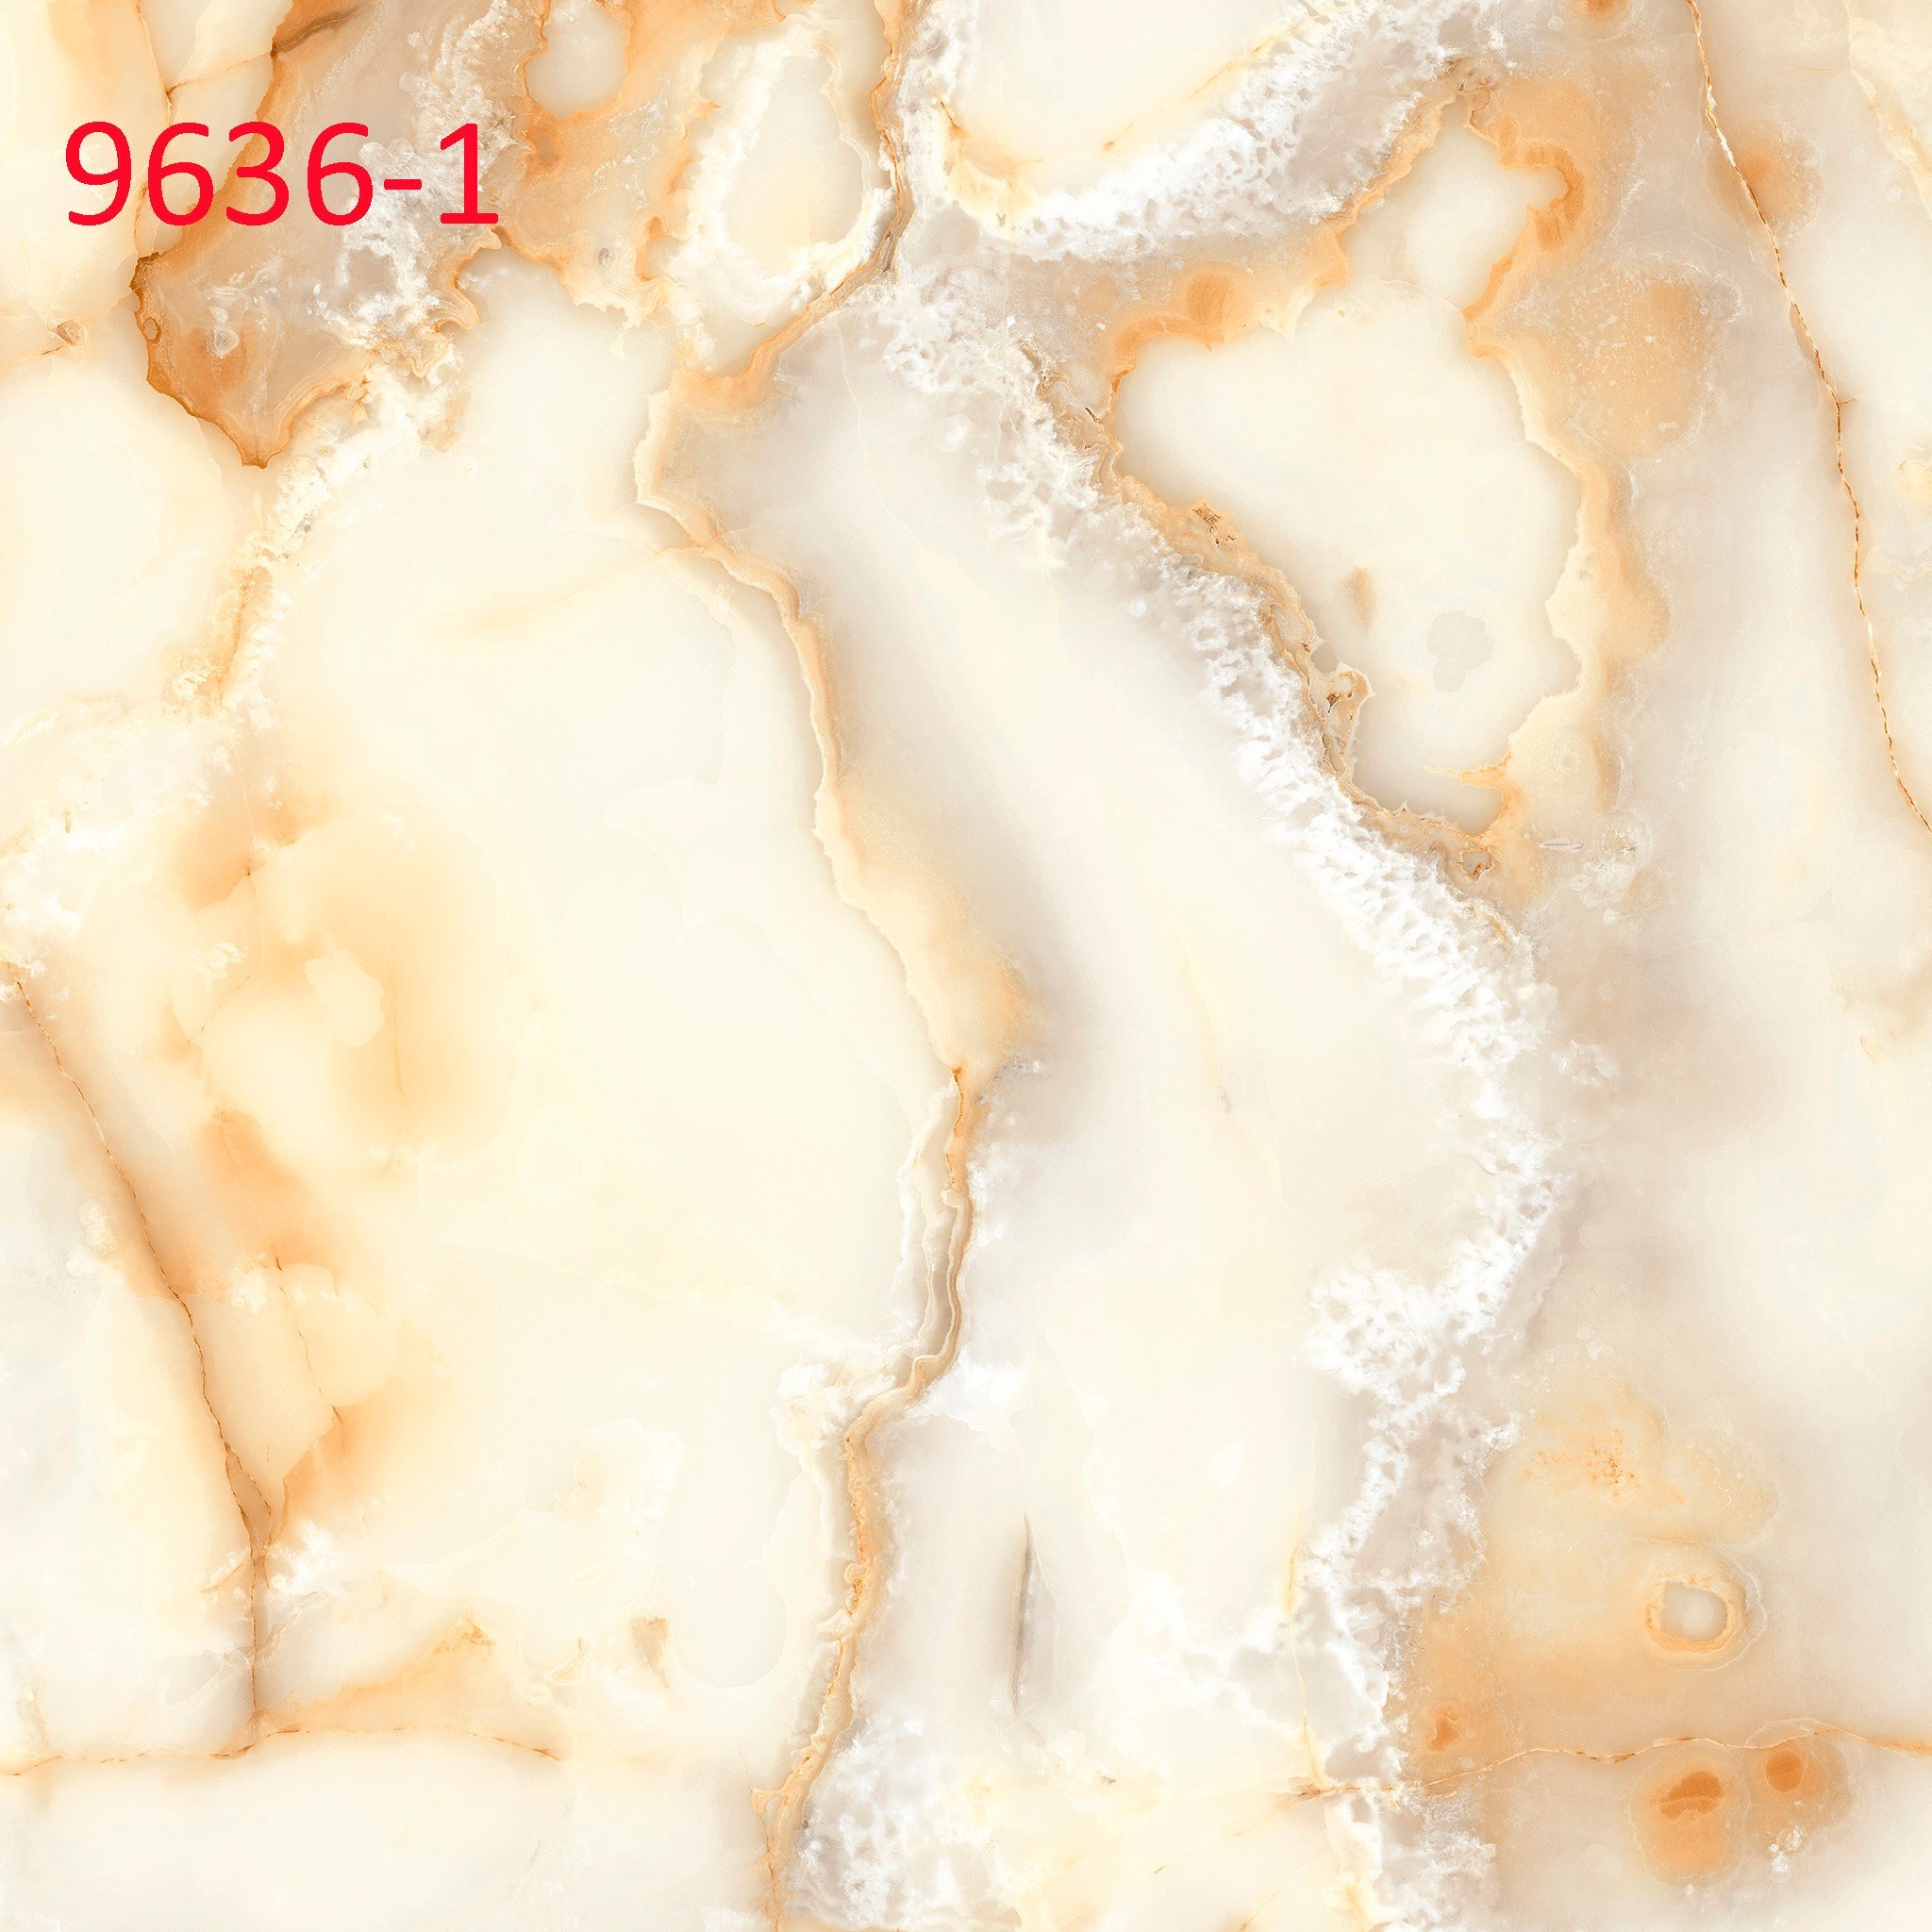 600X600mm Jinjiang Highly Recommended Glazed Interior Floor Tiles Design